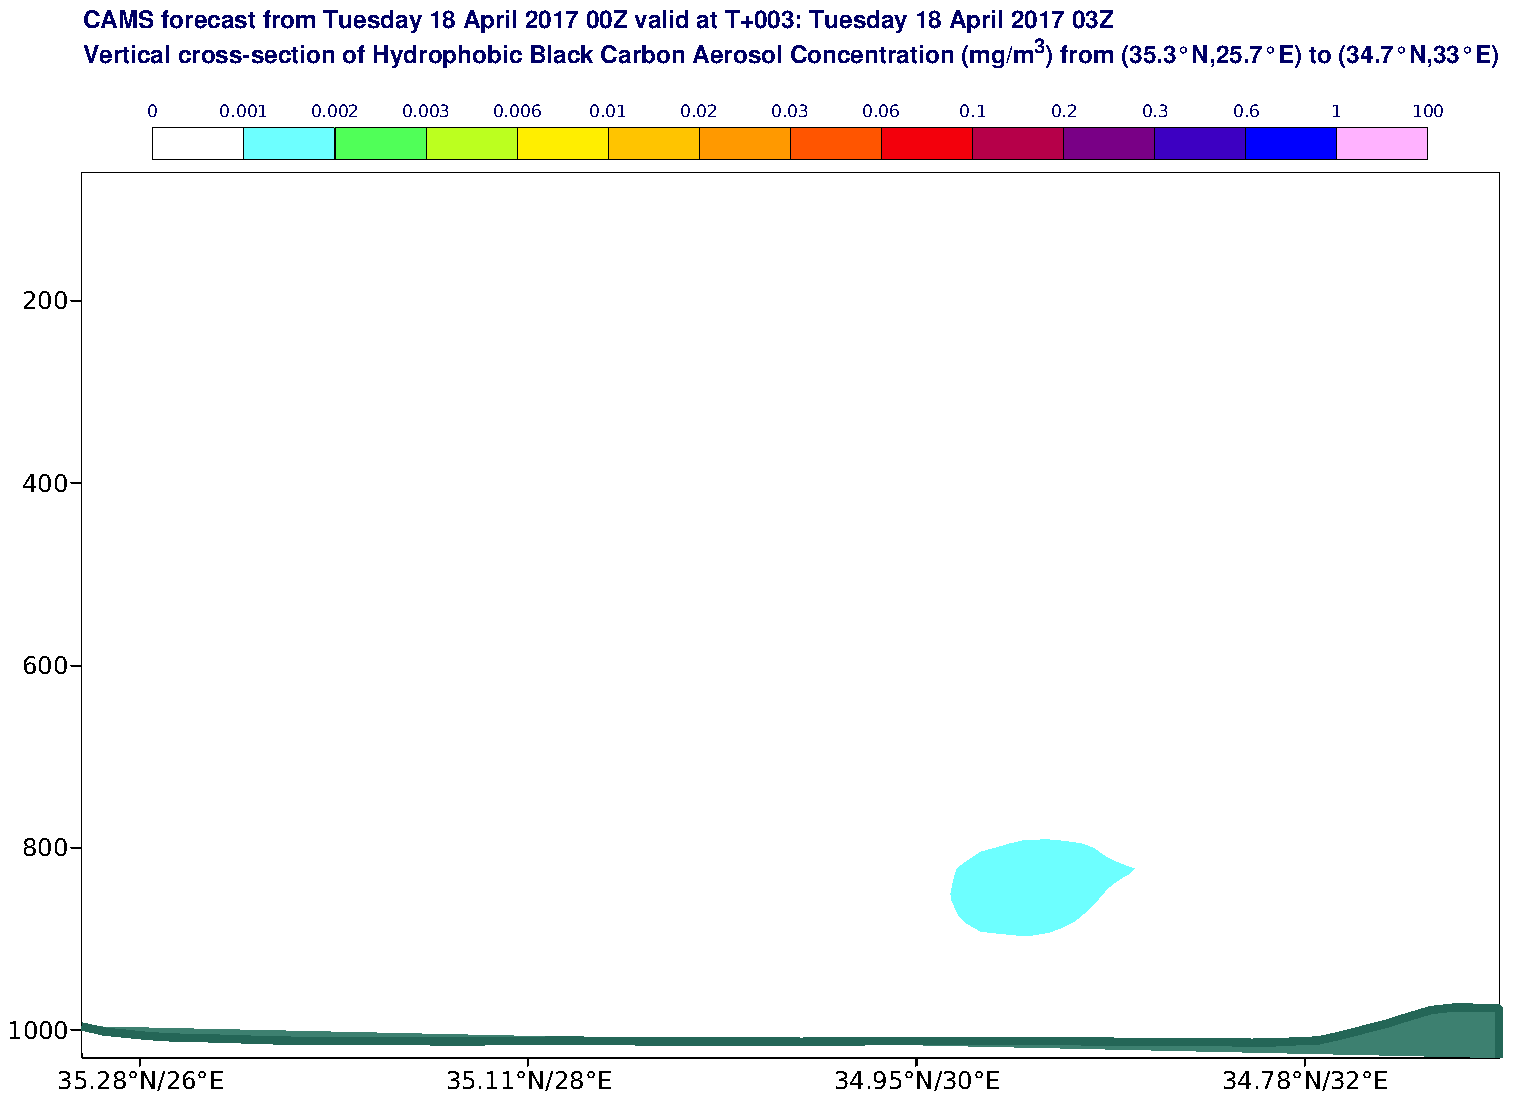 Vertical cross-section of Hydrophobic Black Carbon Aerosol Concentration (mg/m3) valid at T3 - 2017-04-18 03:00